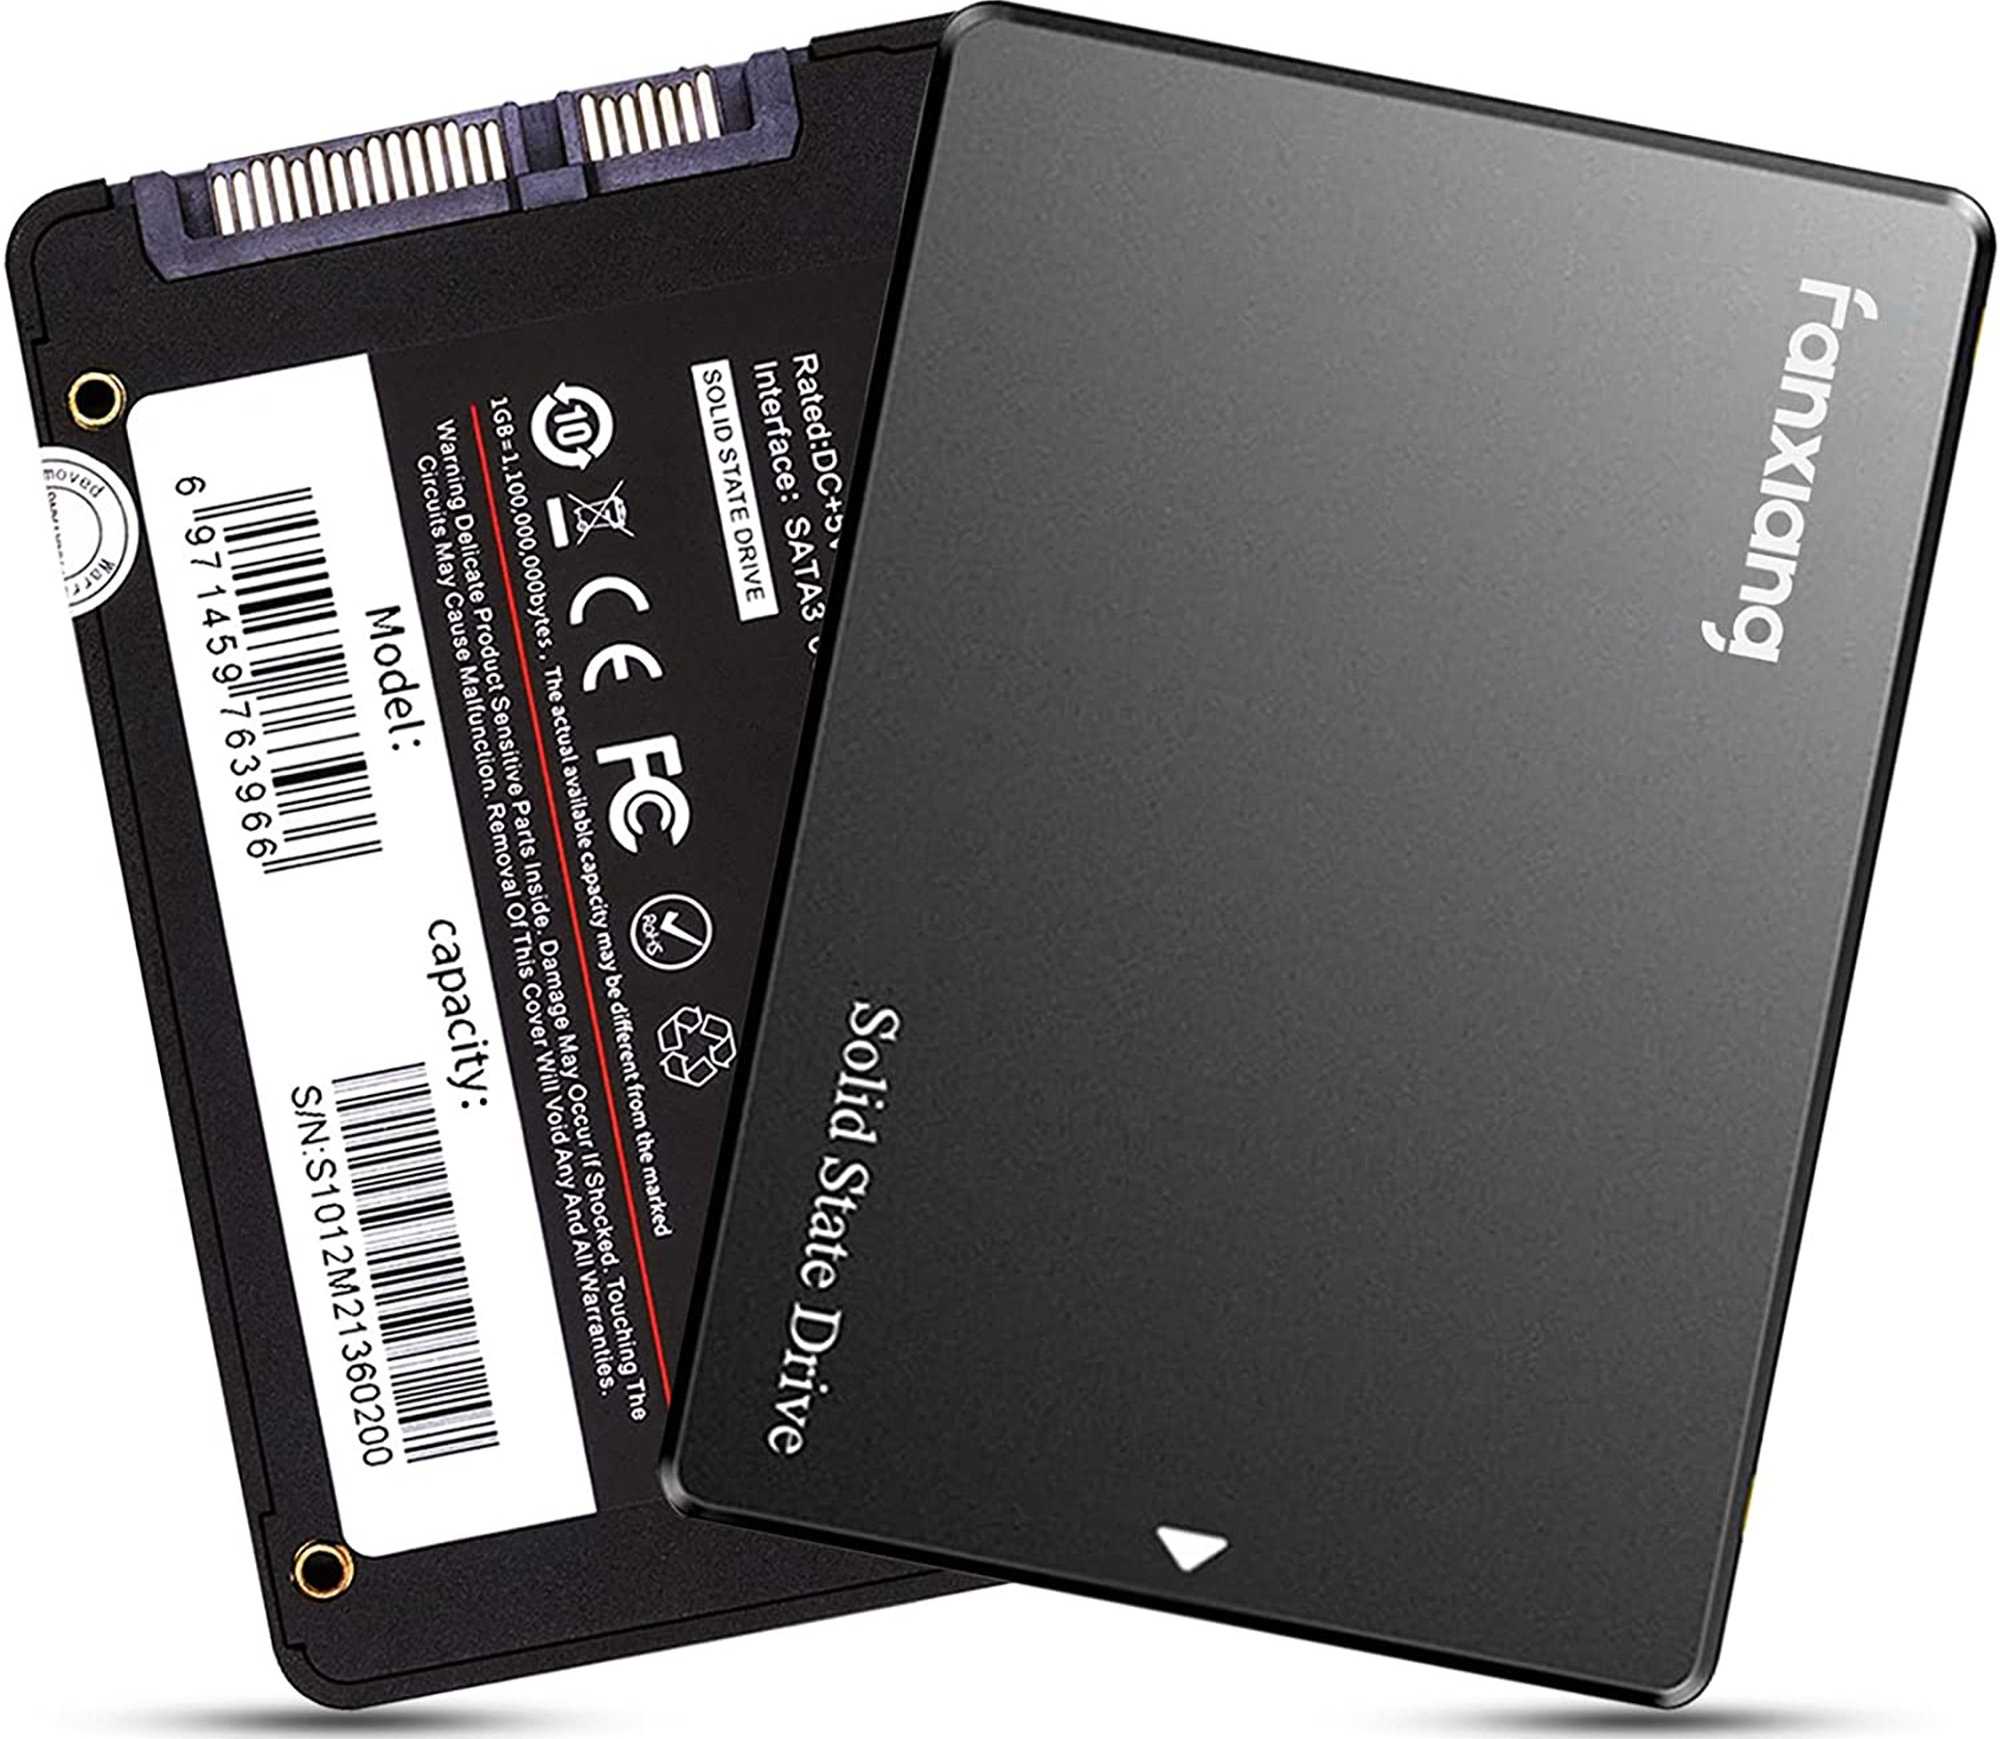 Fanxiang S101 1TB SSD 2.5 inches SATA III 6Gb/s Internal Solid